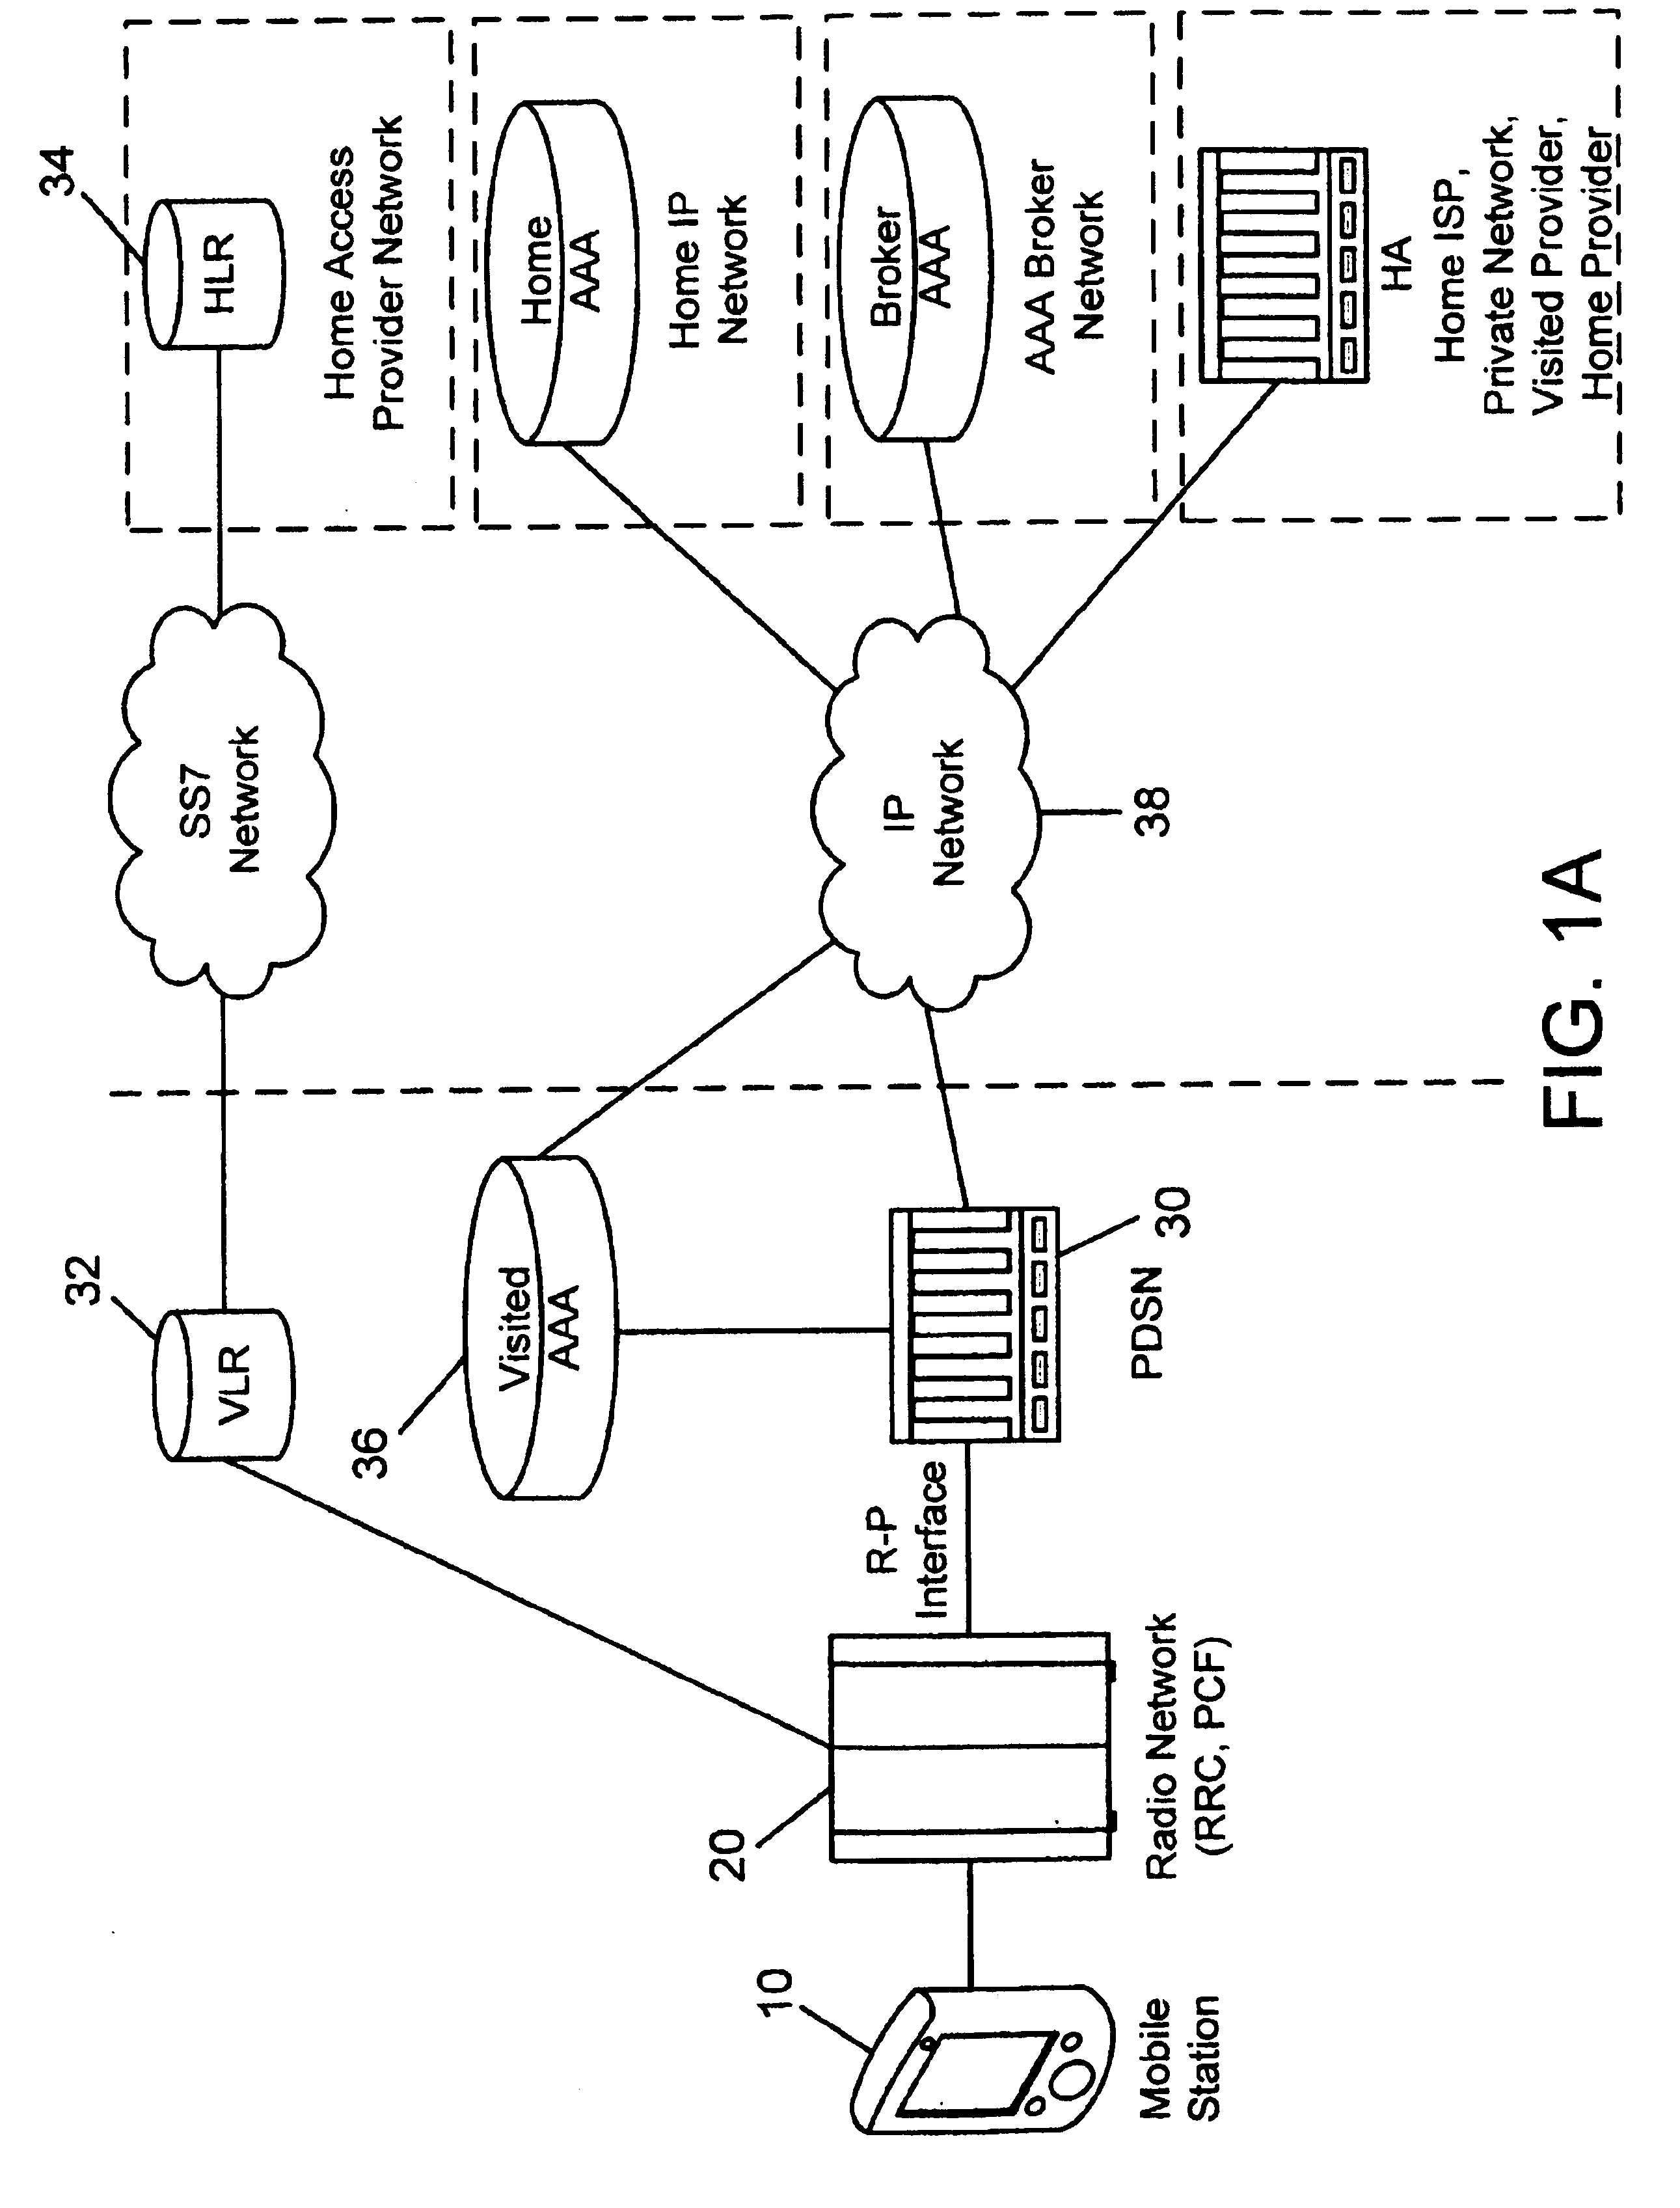 Method and apparatus for controlling a quiet zone for wireless units